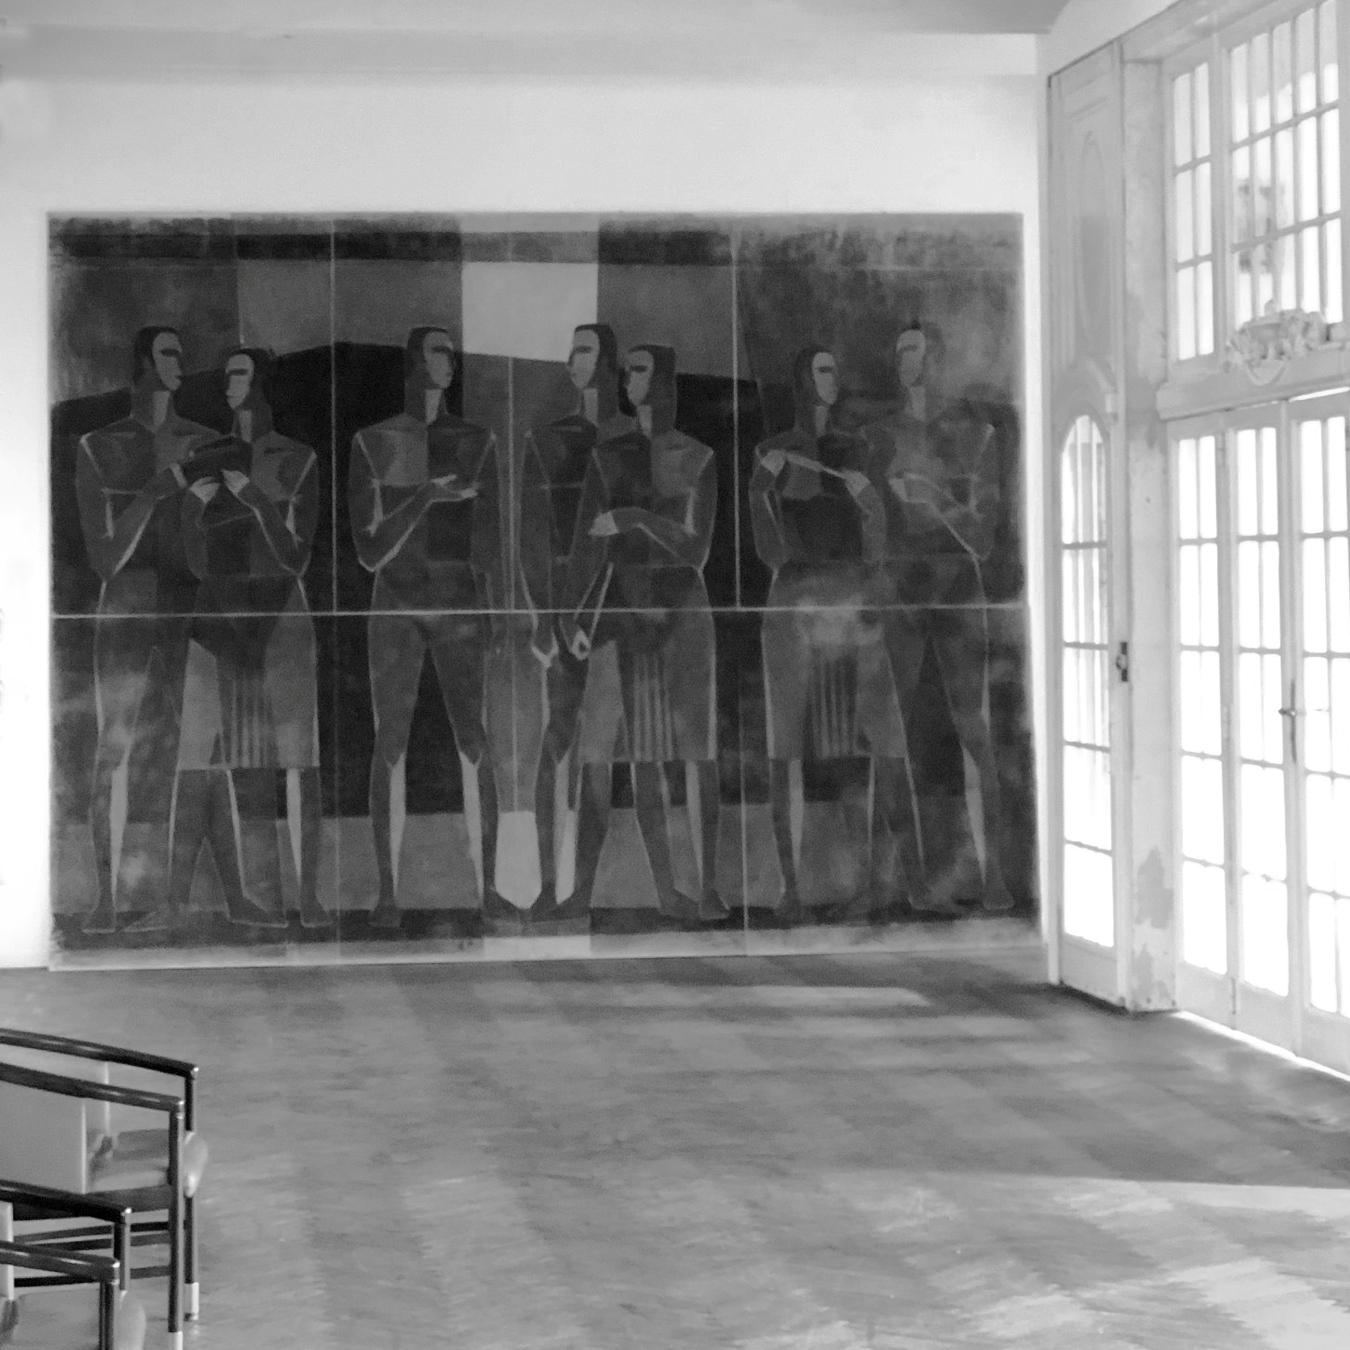 Lajos Kantor b. 1922-2013
Study for mosaic executed in 1964 for University of Pannonia, Veszprem, Hungary.
Large size composition on 8 panels. Pencil and charcoal drawing/study on paper adhered to canvas.
Mosaic was executed in 1965 and is in